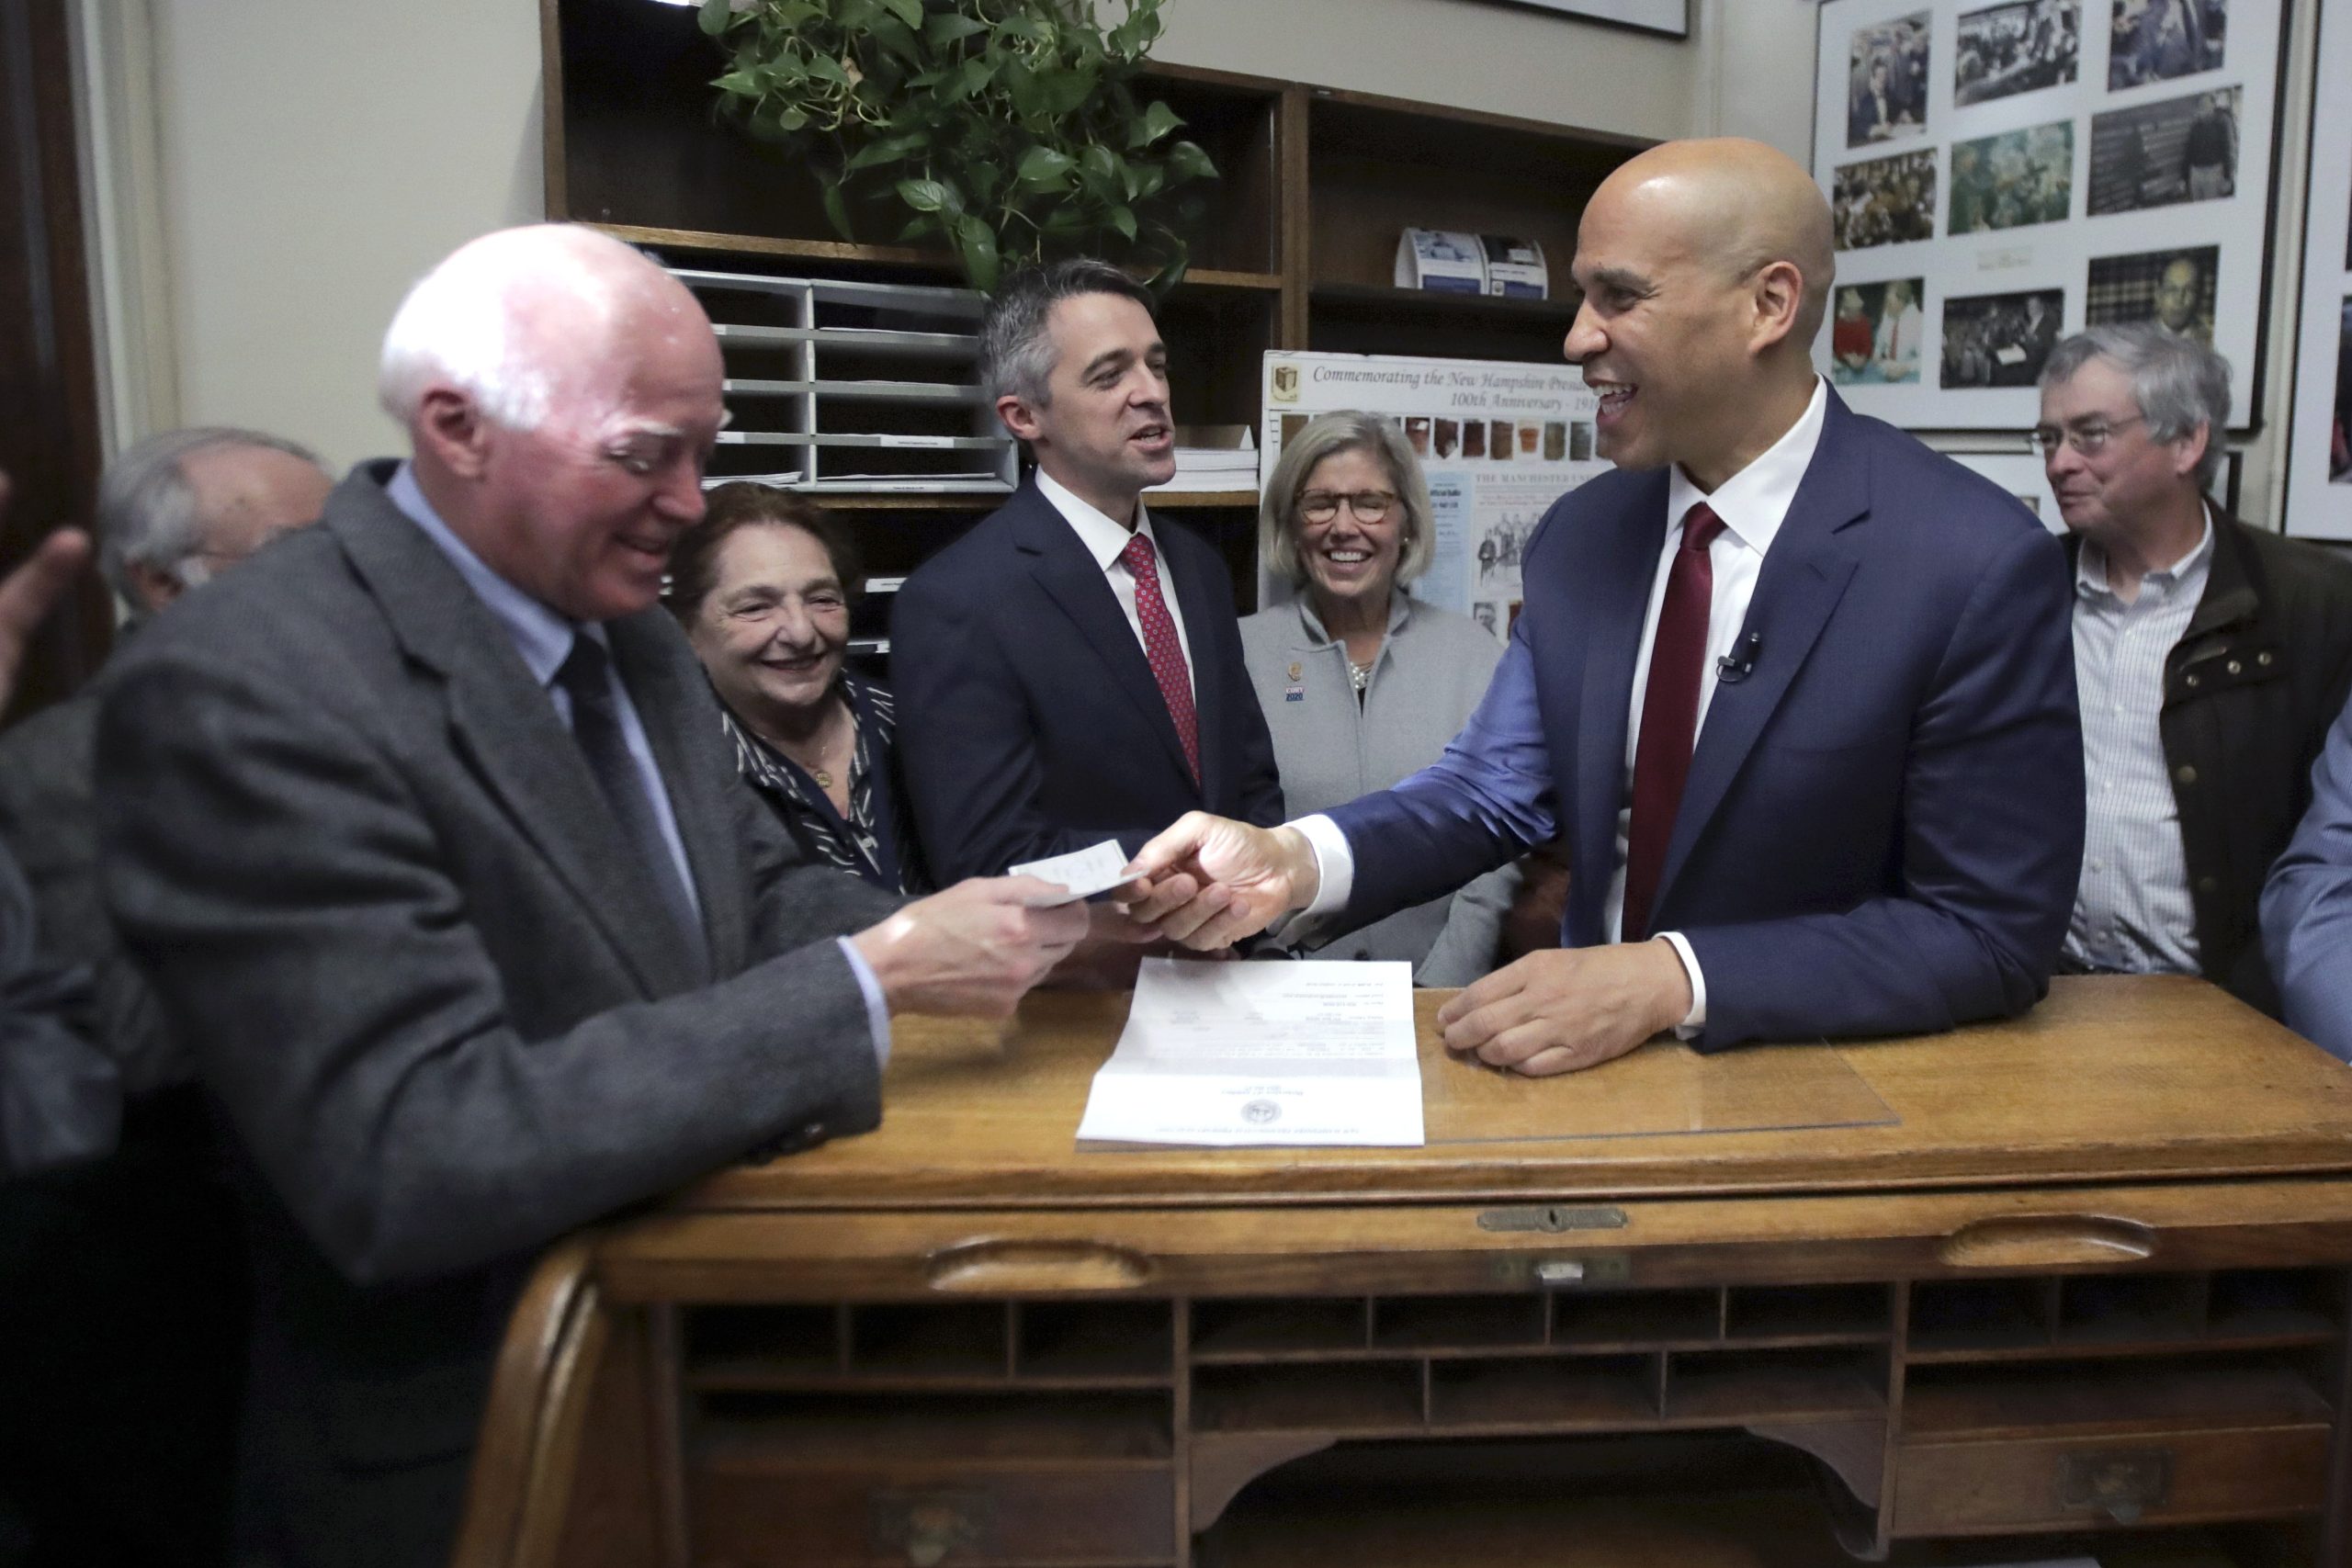 Booker registers for NH primary, interviewed by WTSN’s Mike Pomp